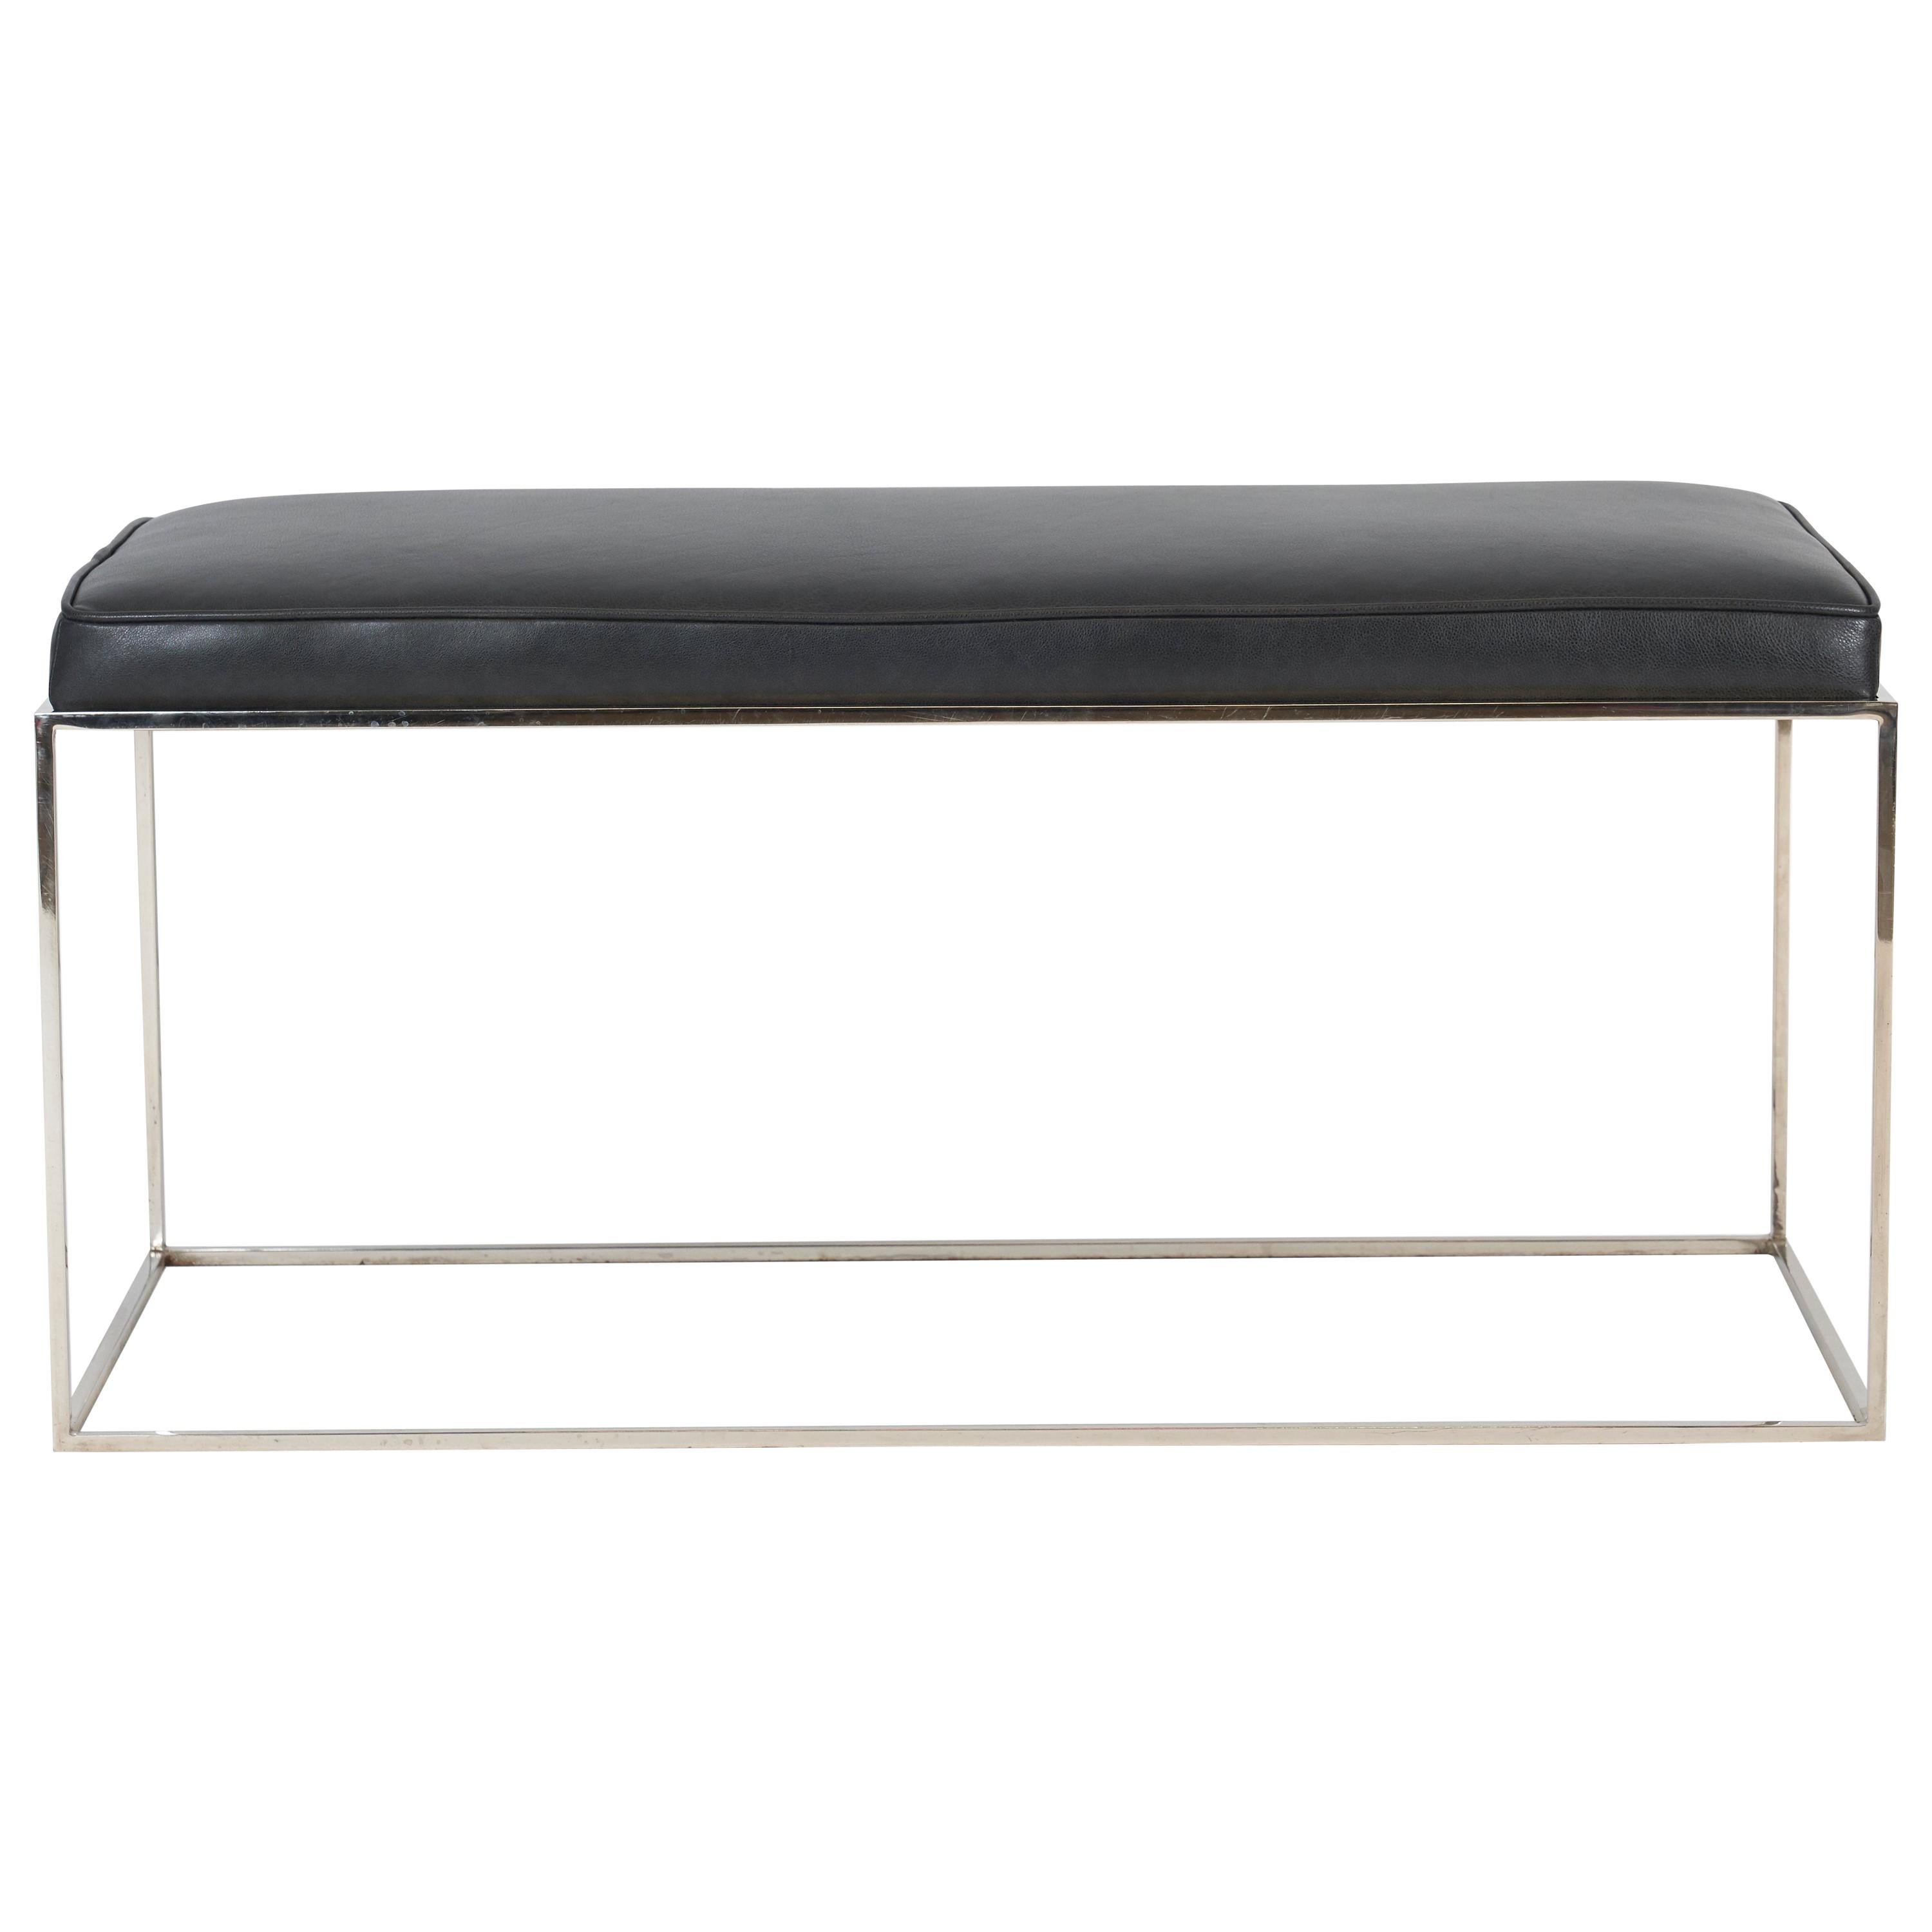 Architectural Chrome Frame Bench by Milo Baughman